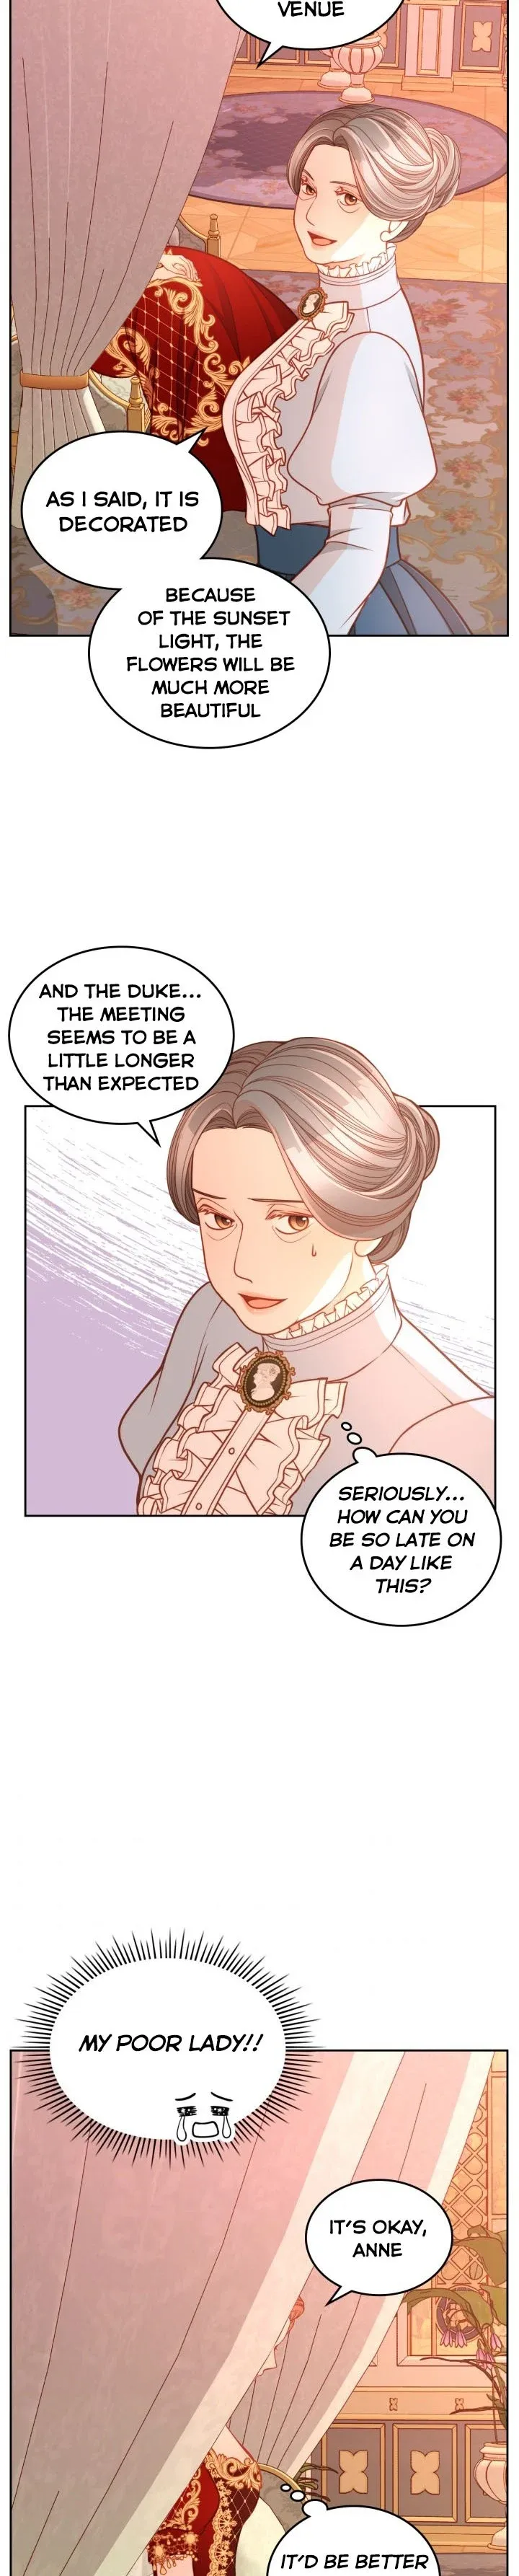 The Duchess’s Secret Dressing Room chapter 15 - Page 15